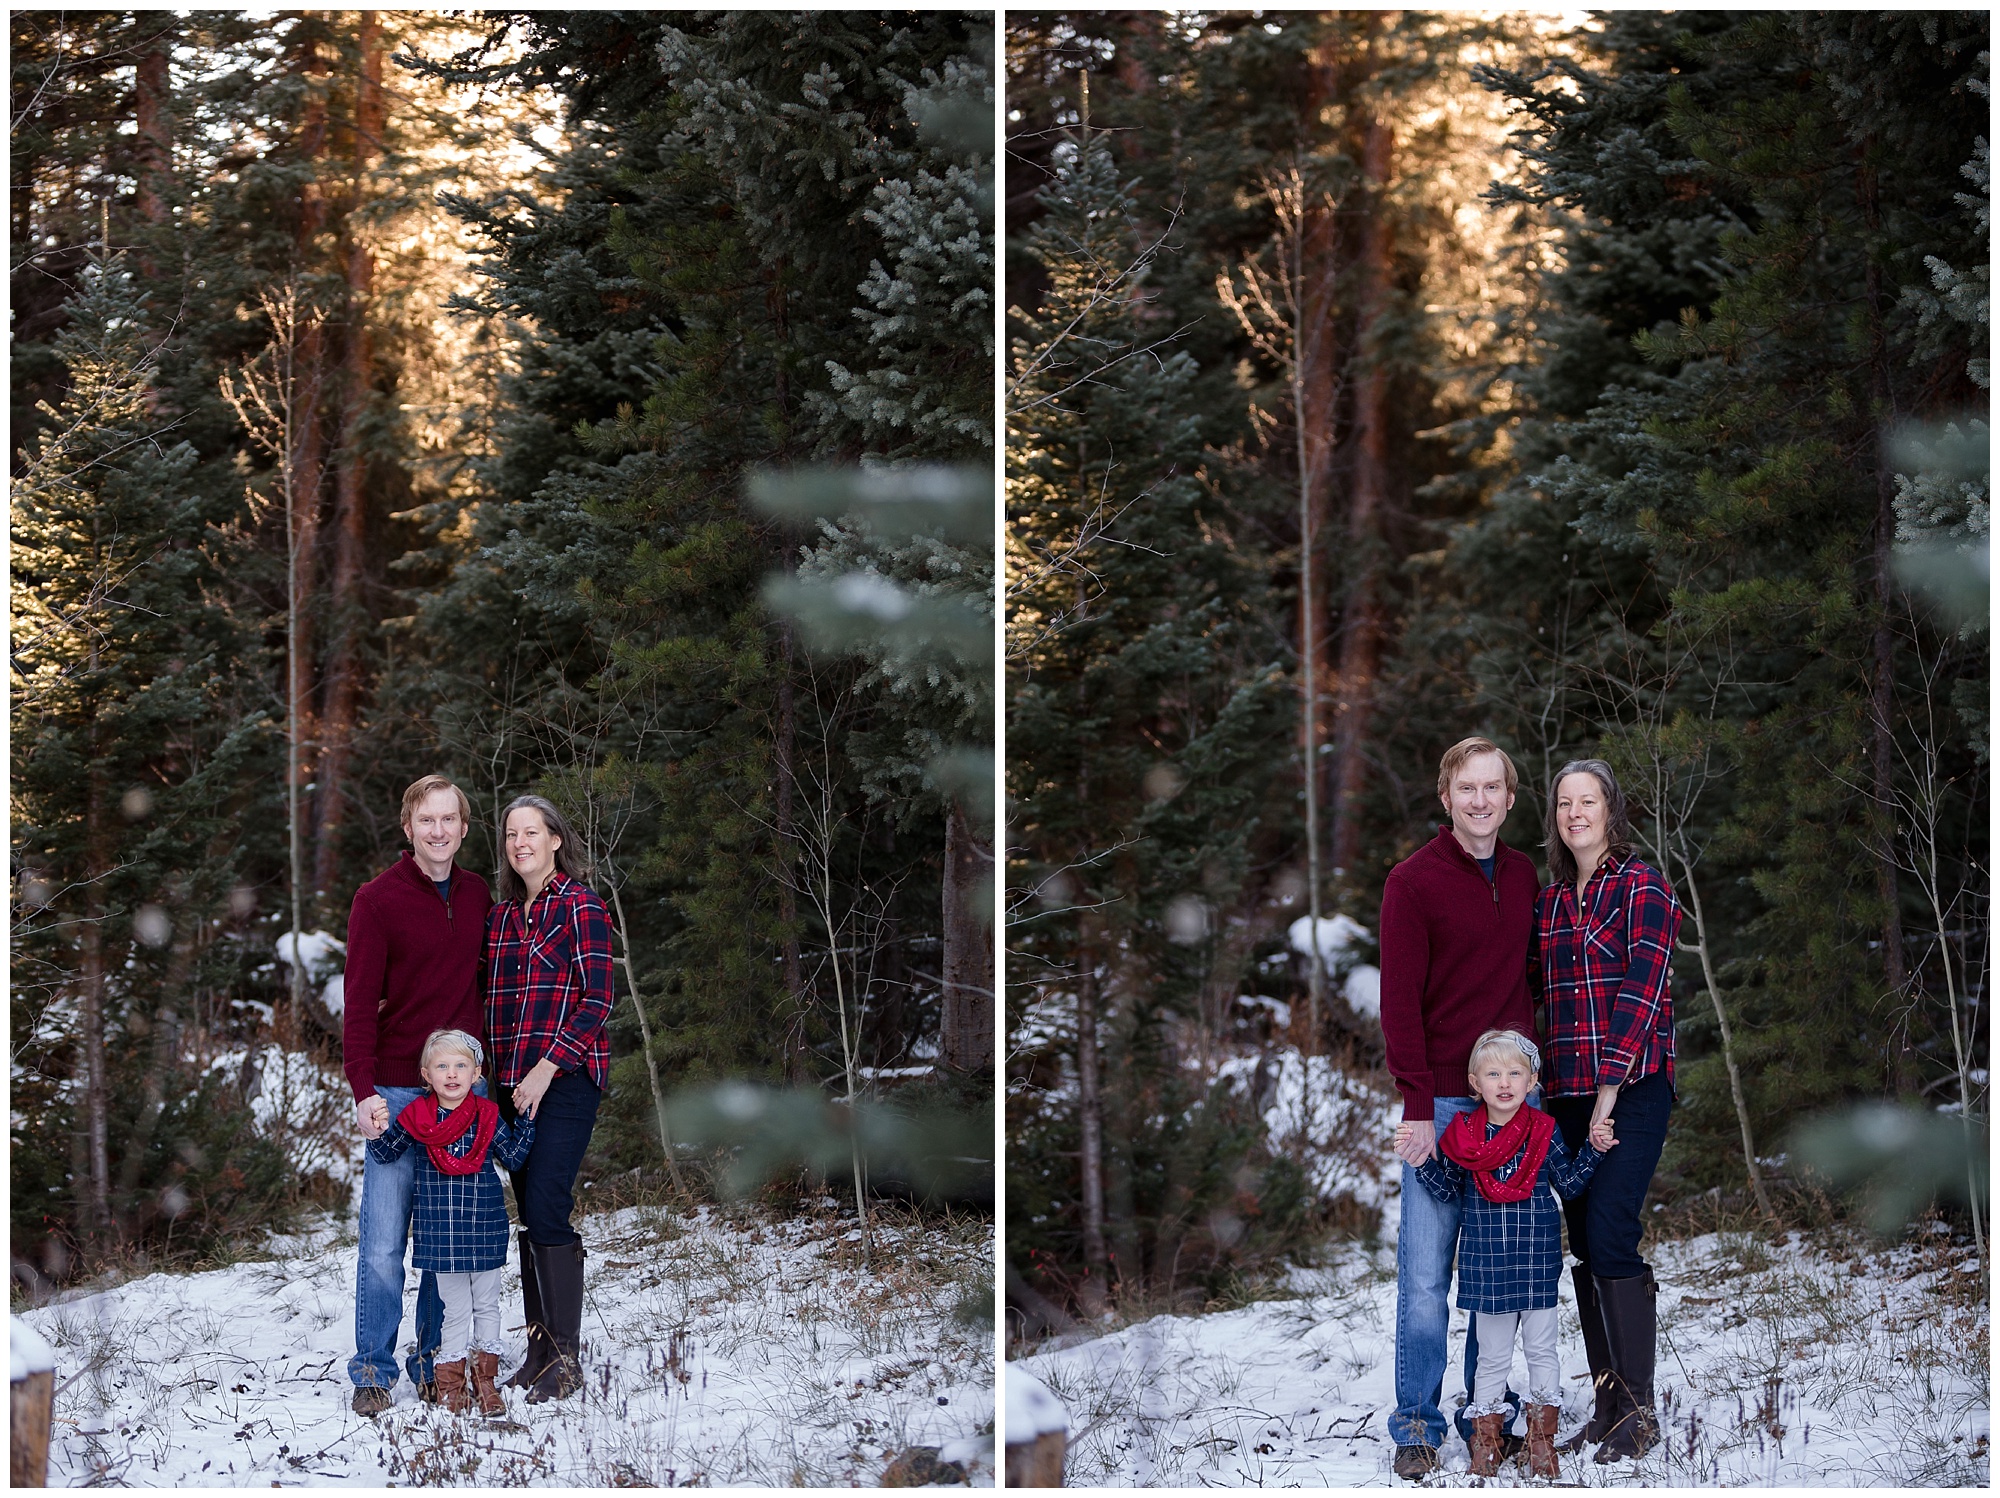 Family of three poses together during their Breckenridge family photo session.